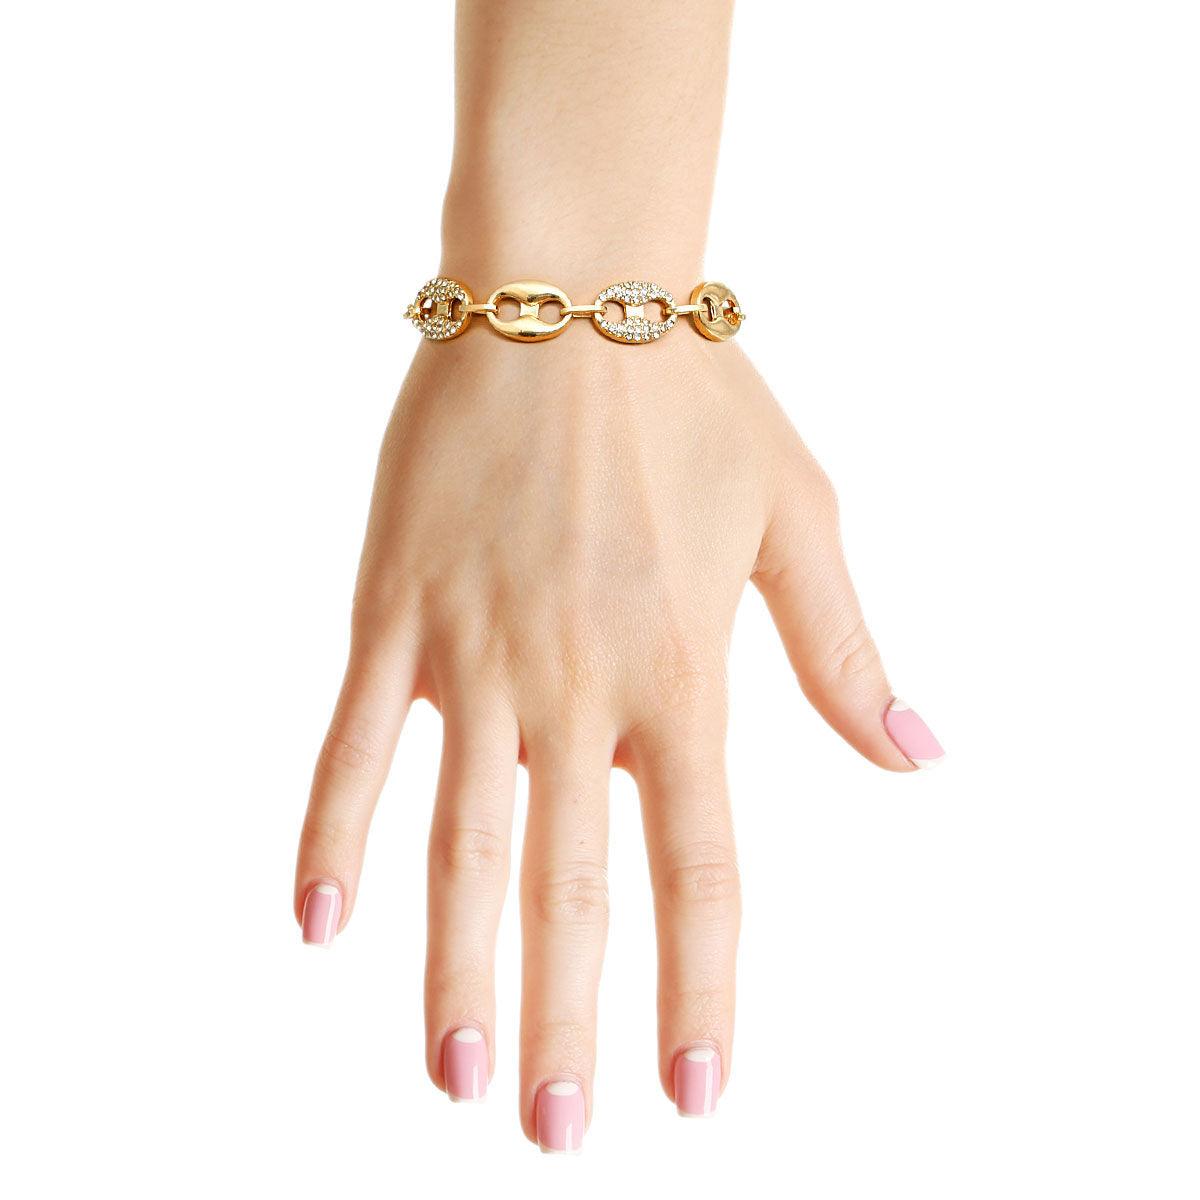 Stylish Gold Plated Matelot Chain Bracelet - Upgrade Your Look Today!